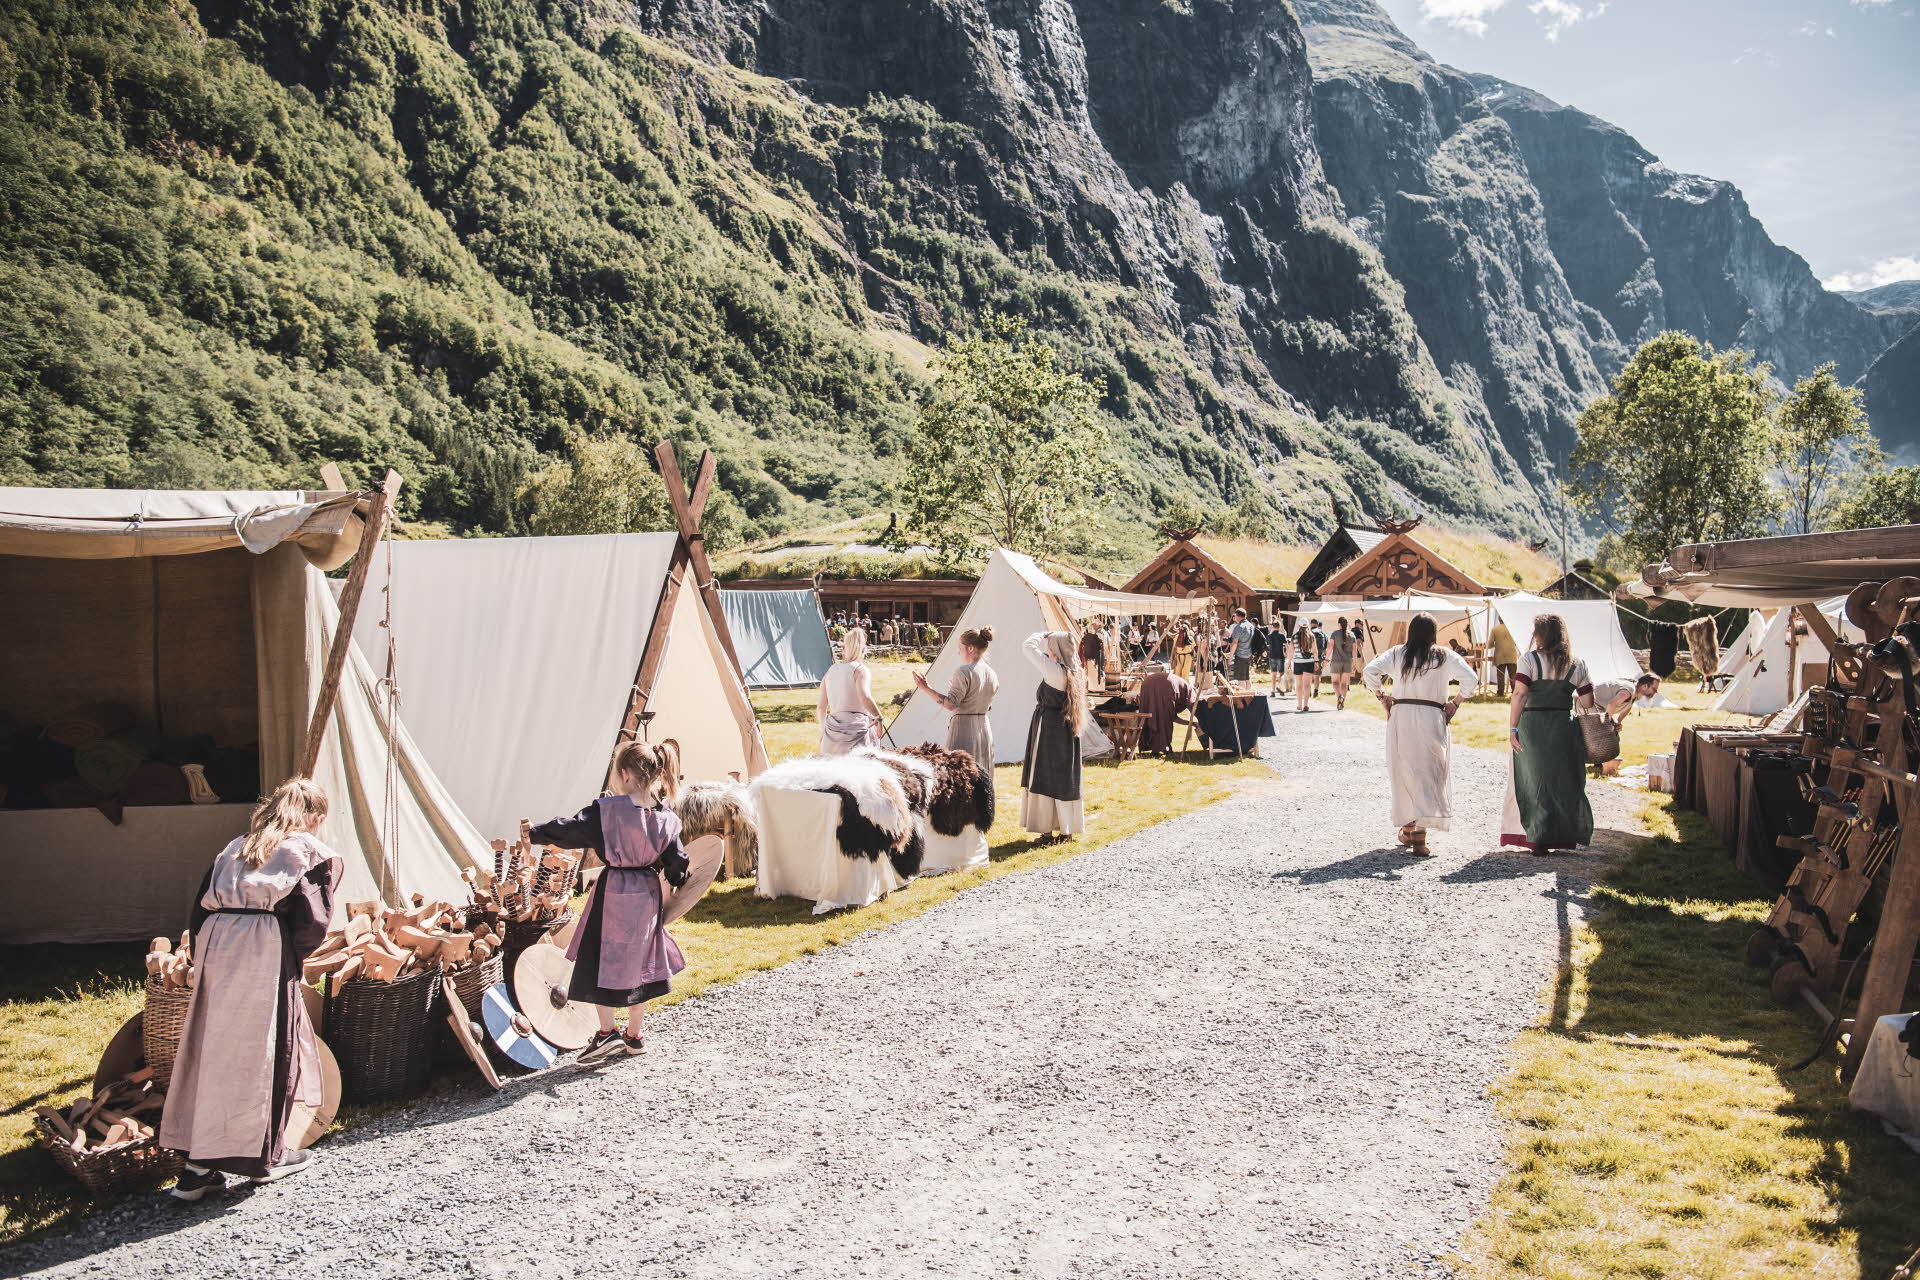 The main street in the Viking Village in Gudvangen, with a tent and busy adults and children